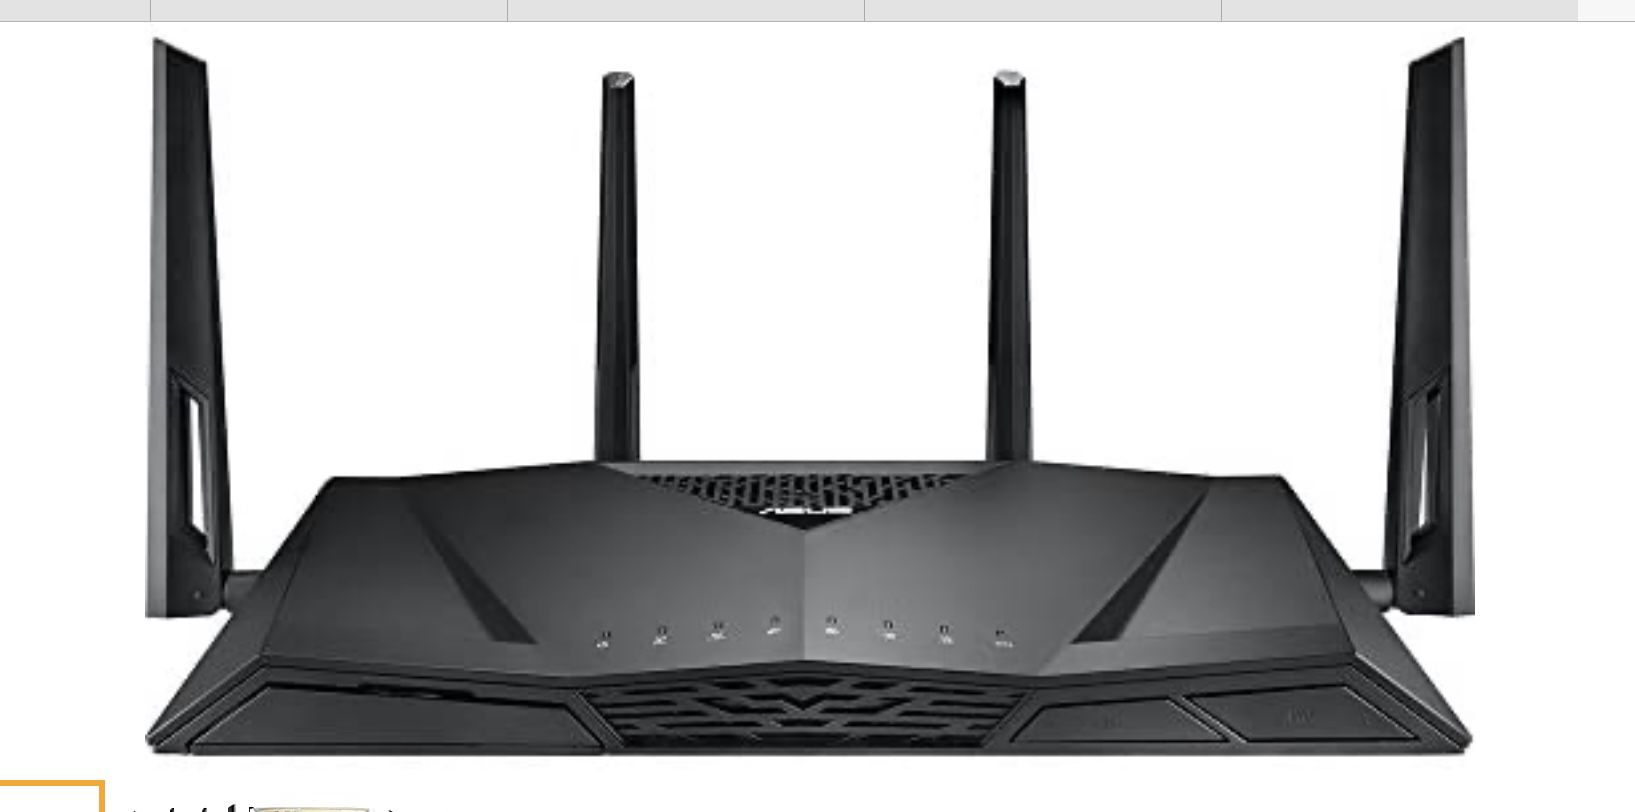 ASUS RT- AC3100 Gaming Router